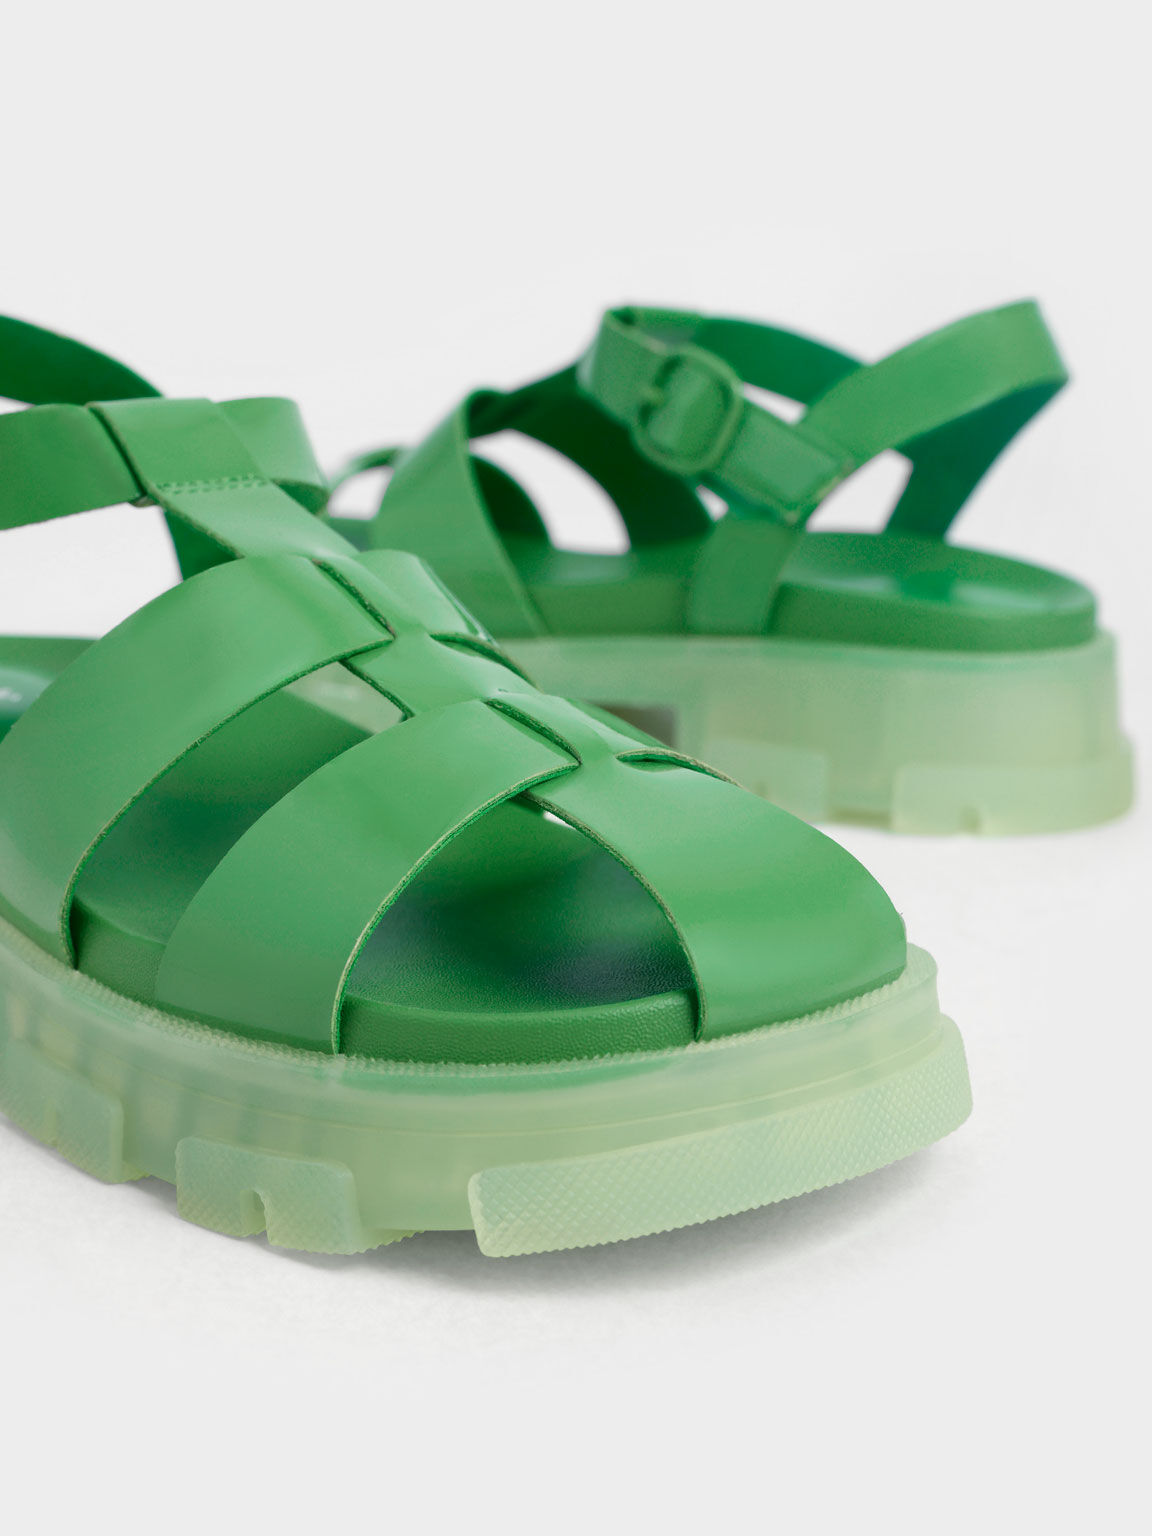 Girls' Patent Caged Sandals, Green, hi-res